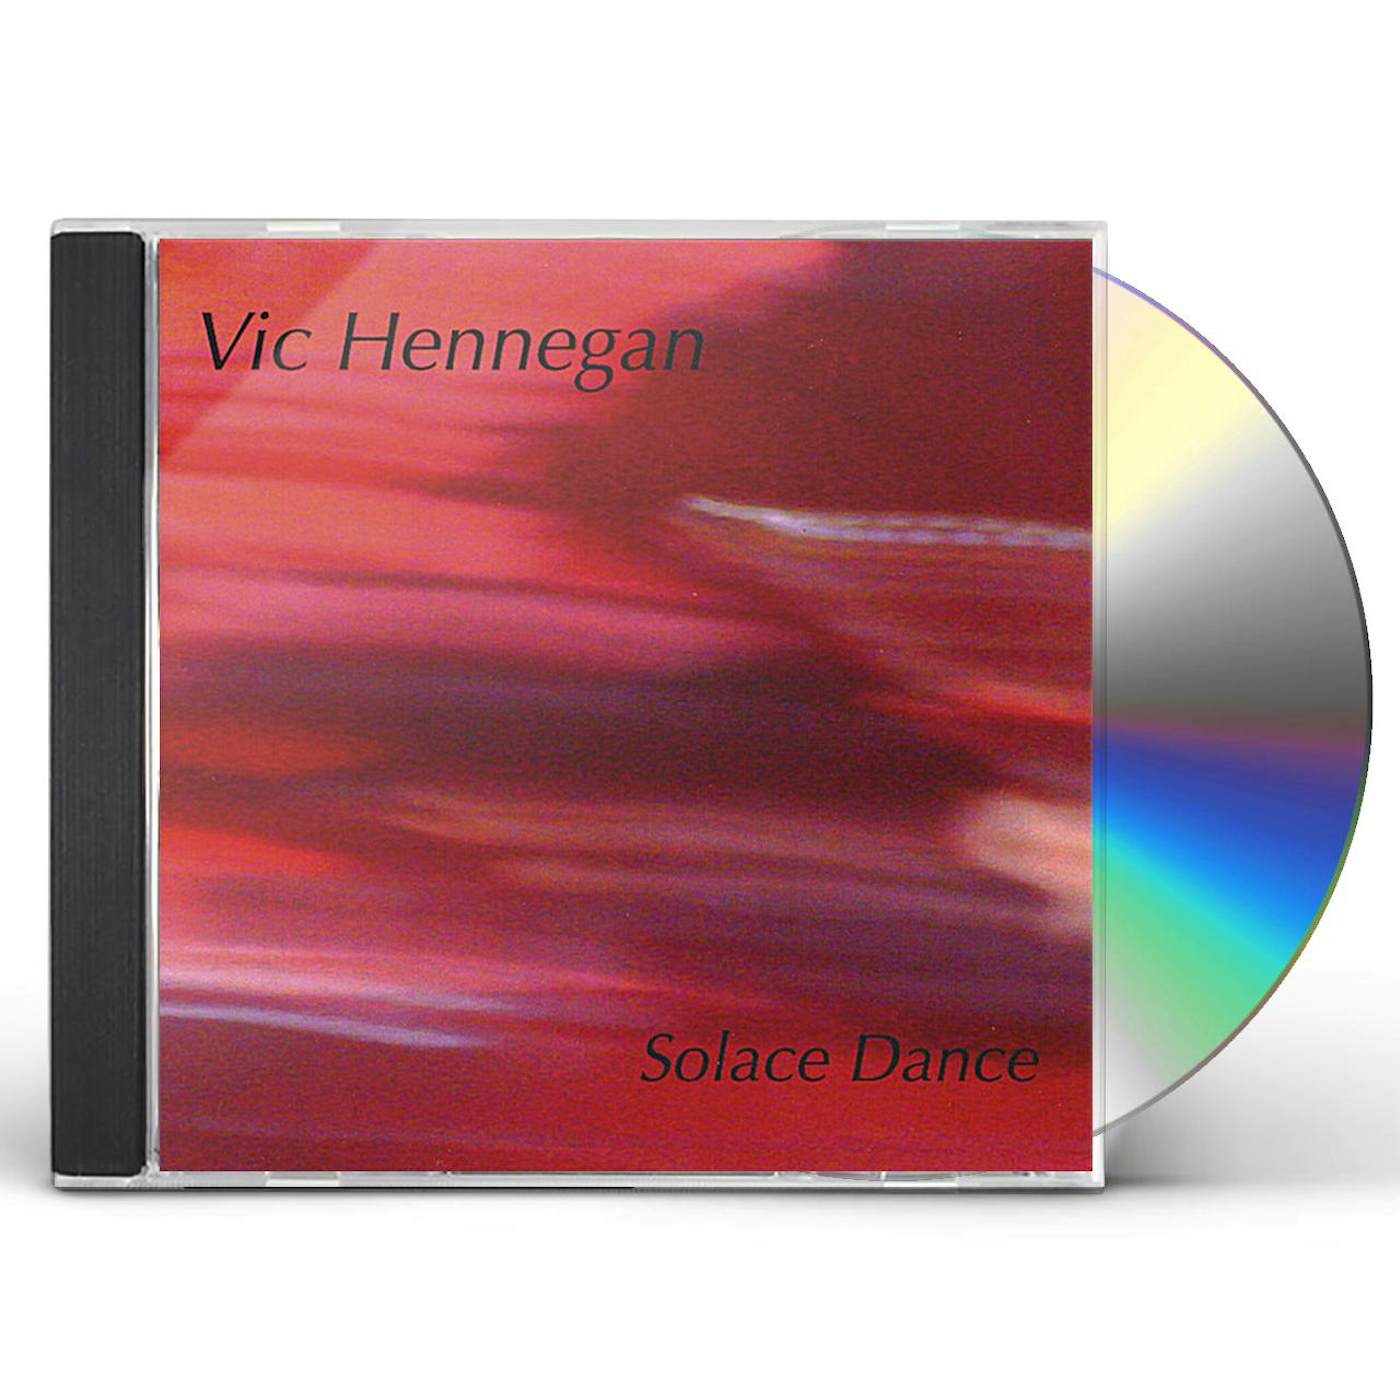 Vic Hennegan SOLACE DANCE CD